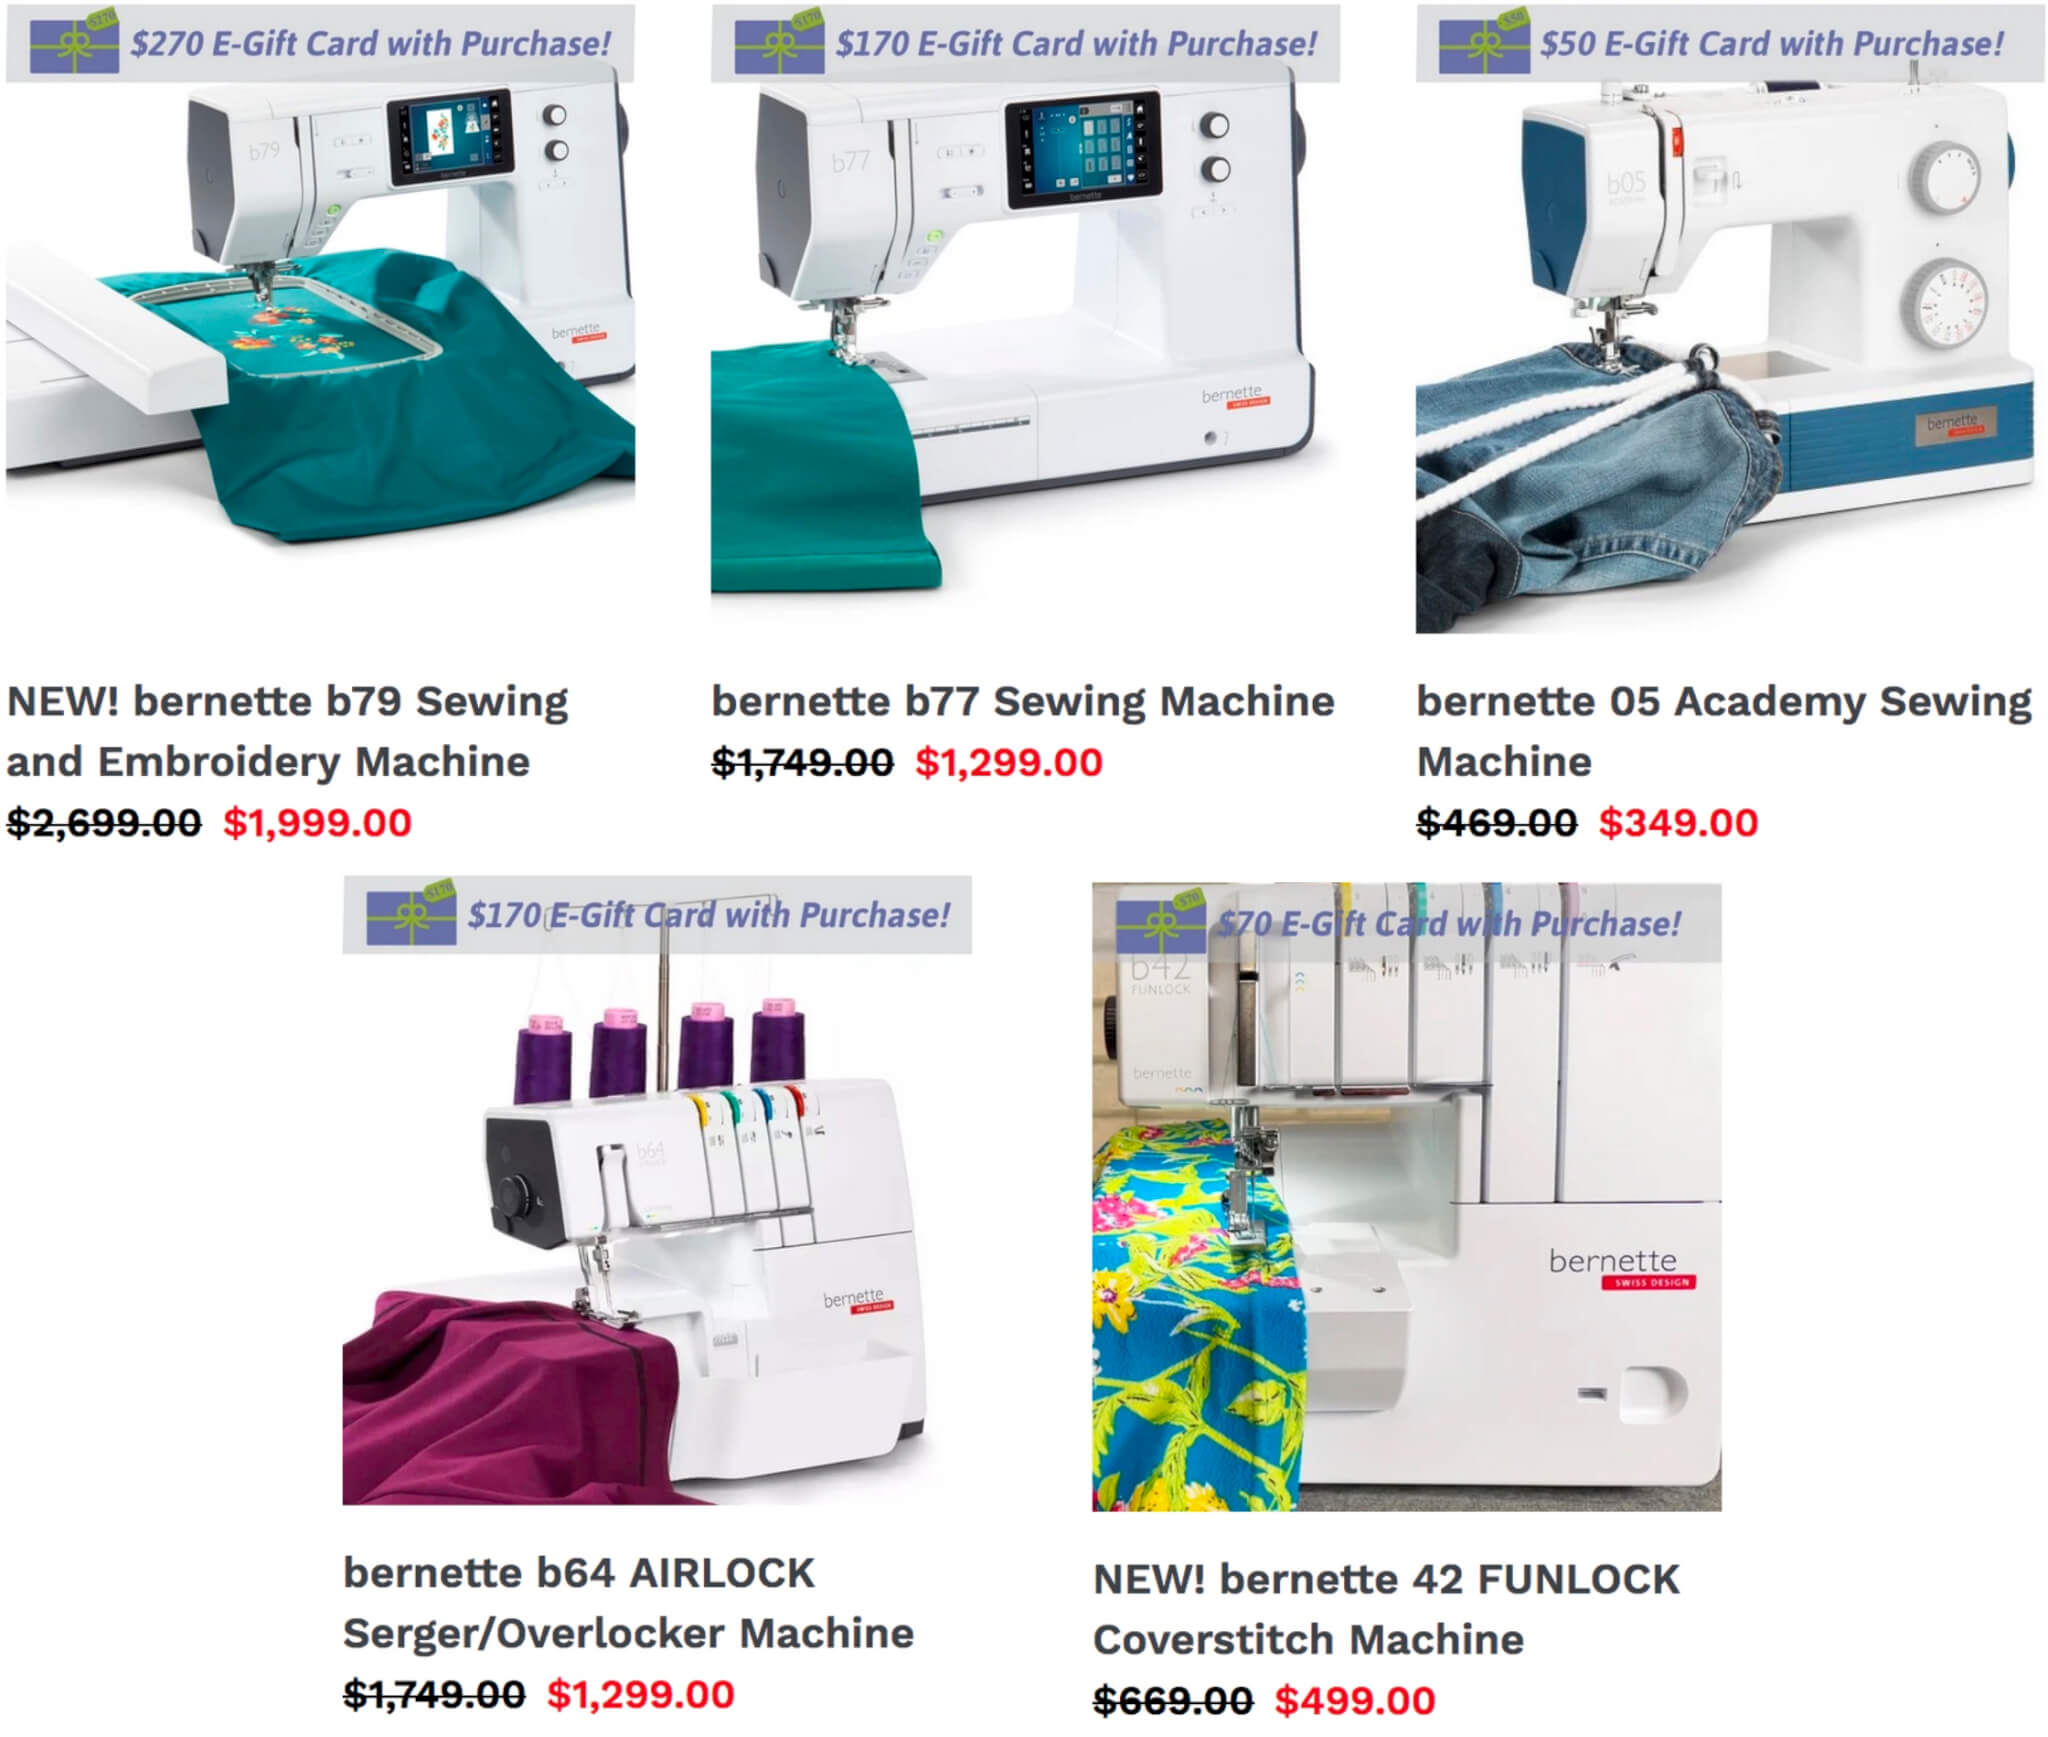 NEW! bernette Sewing Machines and Sergers Available at Nancy Zieman Productions at ShopNZP.com